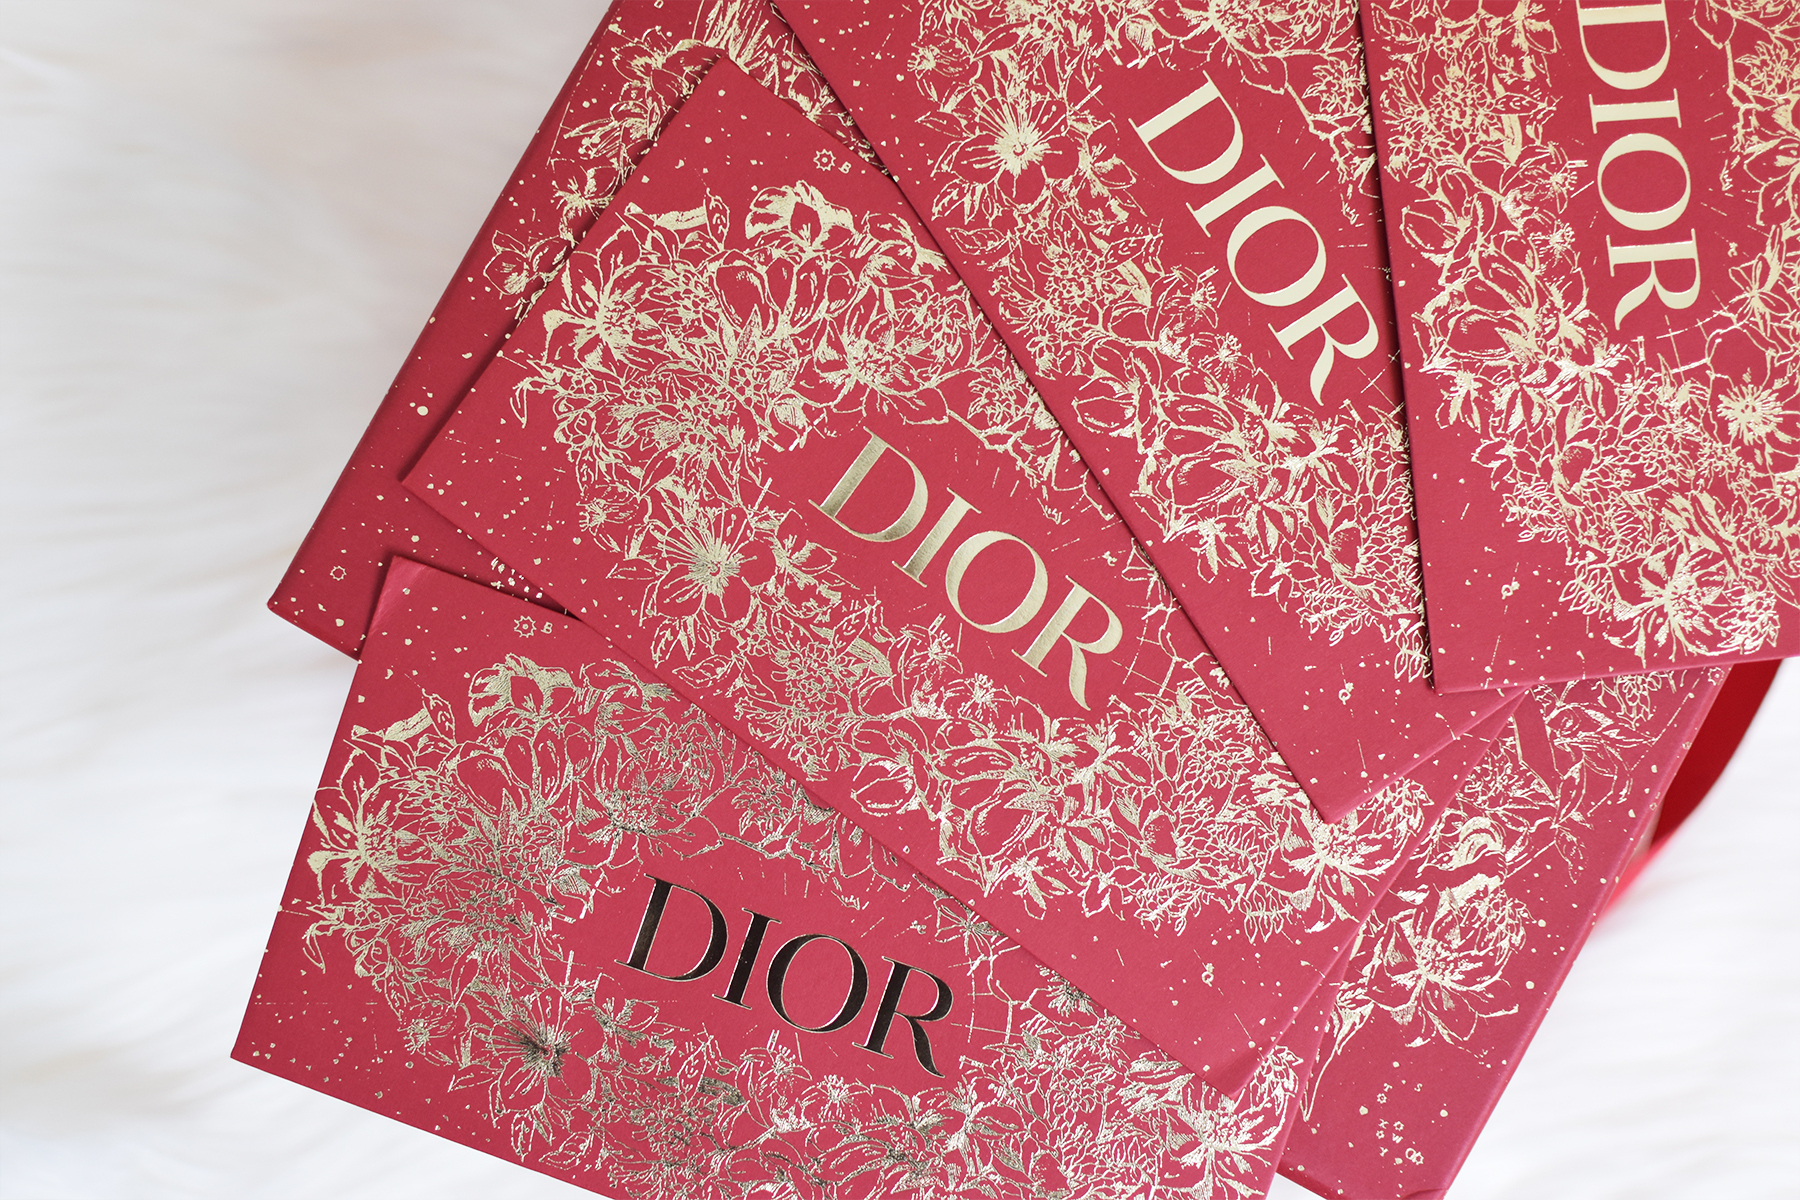  Limited edition Dior gift box tiger lunar Chinese New Year 2022  Everything Else on Carousell